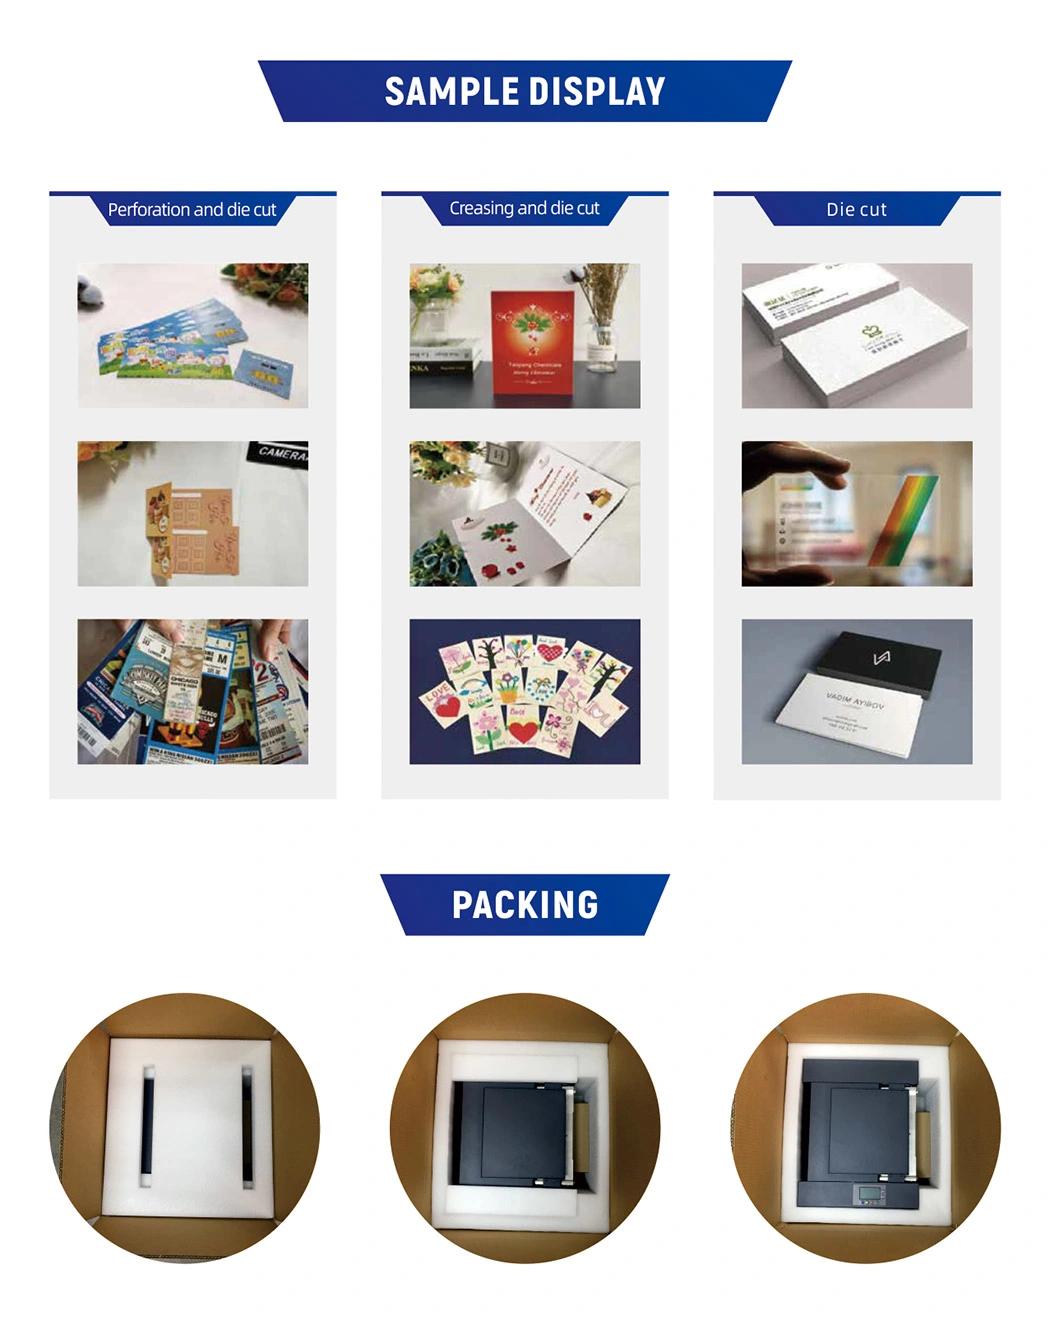 Cc330 Auto Playing Card/Business Card/Photo Card Cutter Machine Slitting Card Cutter Machine